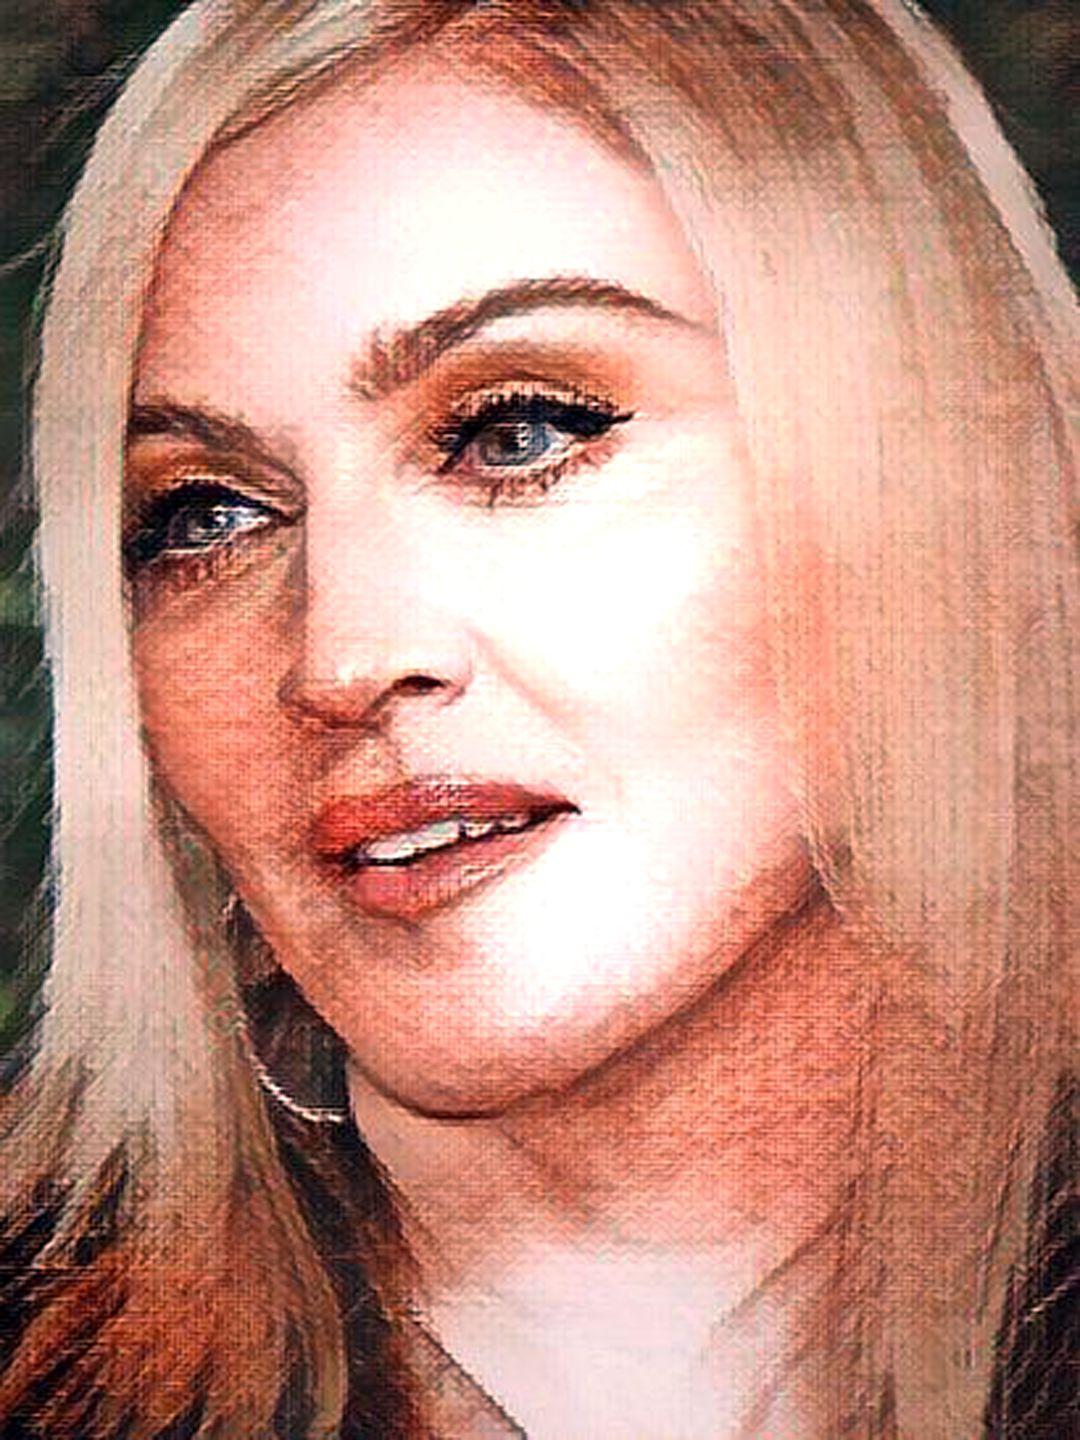 Madonna # 36 - Celeb ART - Beautiful Artworks of Celebrities, Footballers,  Politicians and Famous People in World | OpenSea